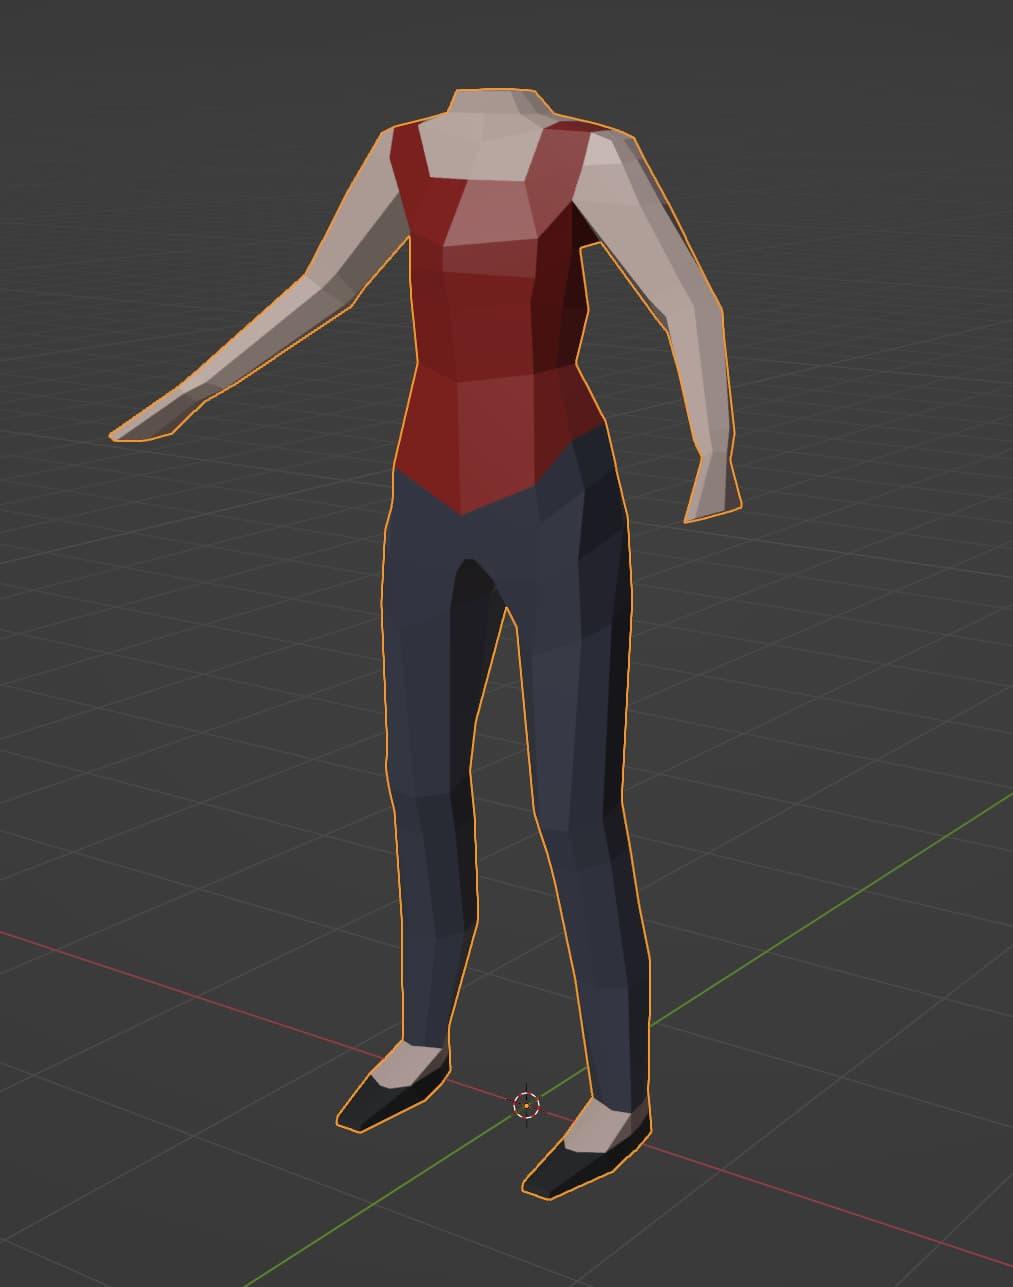 A low-poly 3D model of a headless female torso, with a red shirt, light skin, blue pants, and black shoes